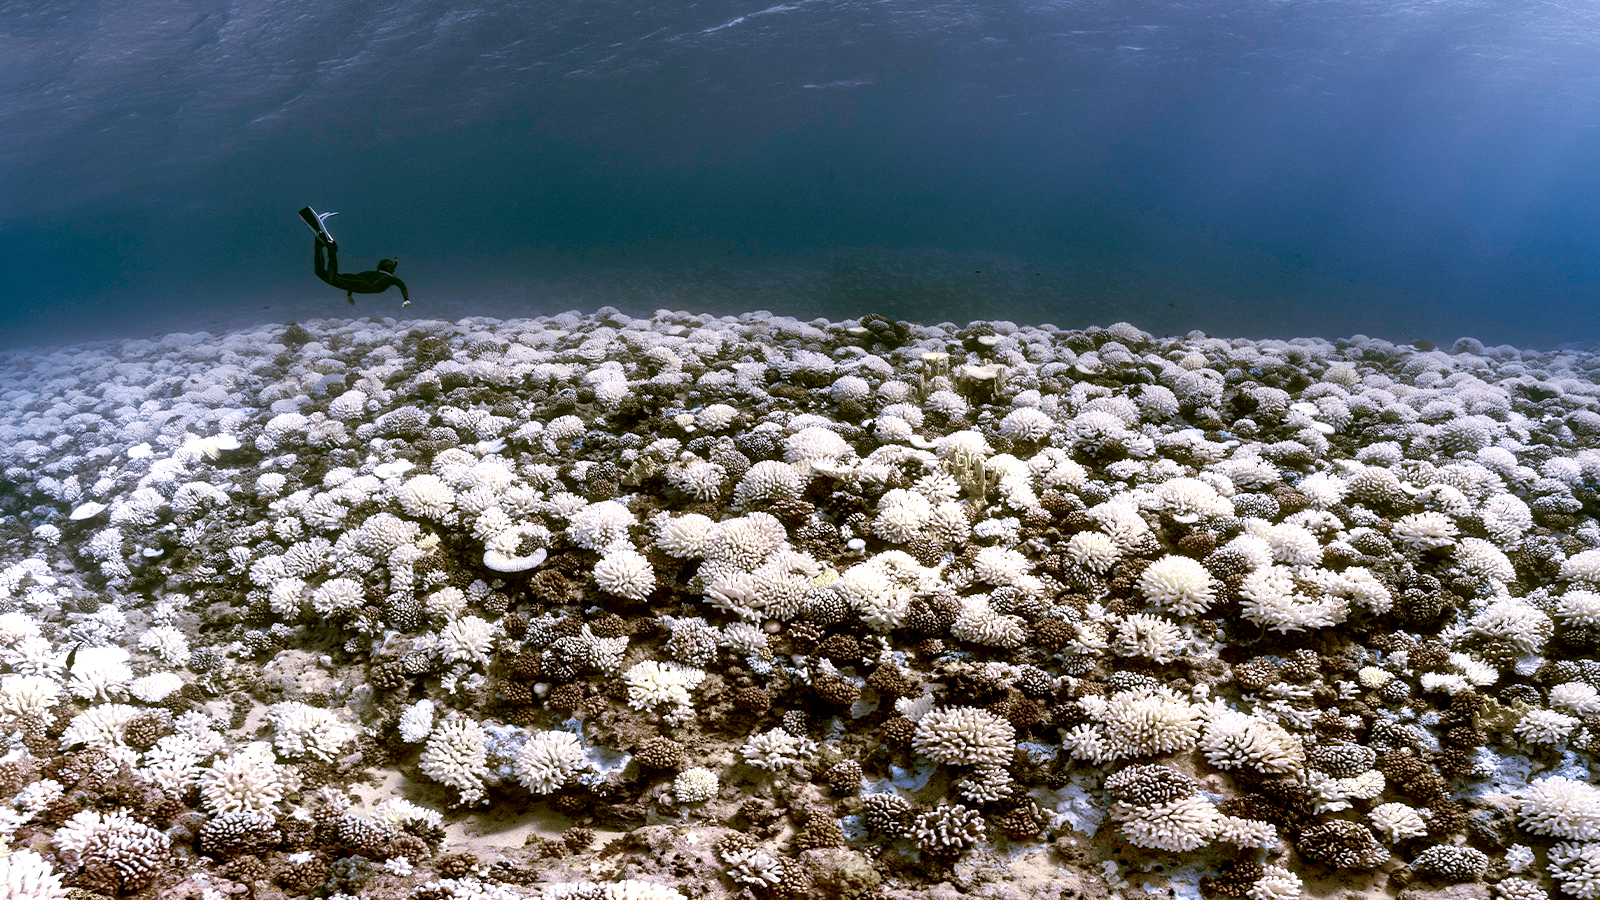 A view of bleached coral reefs in Moorea, French Polynesia.